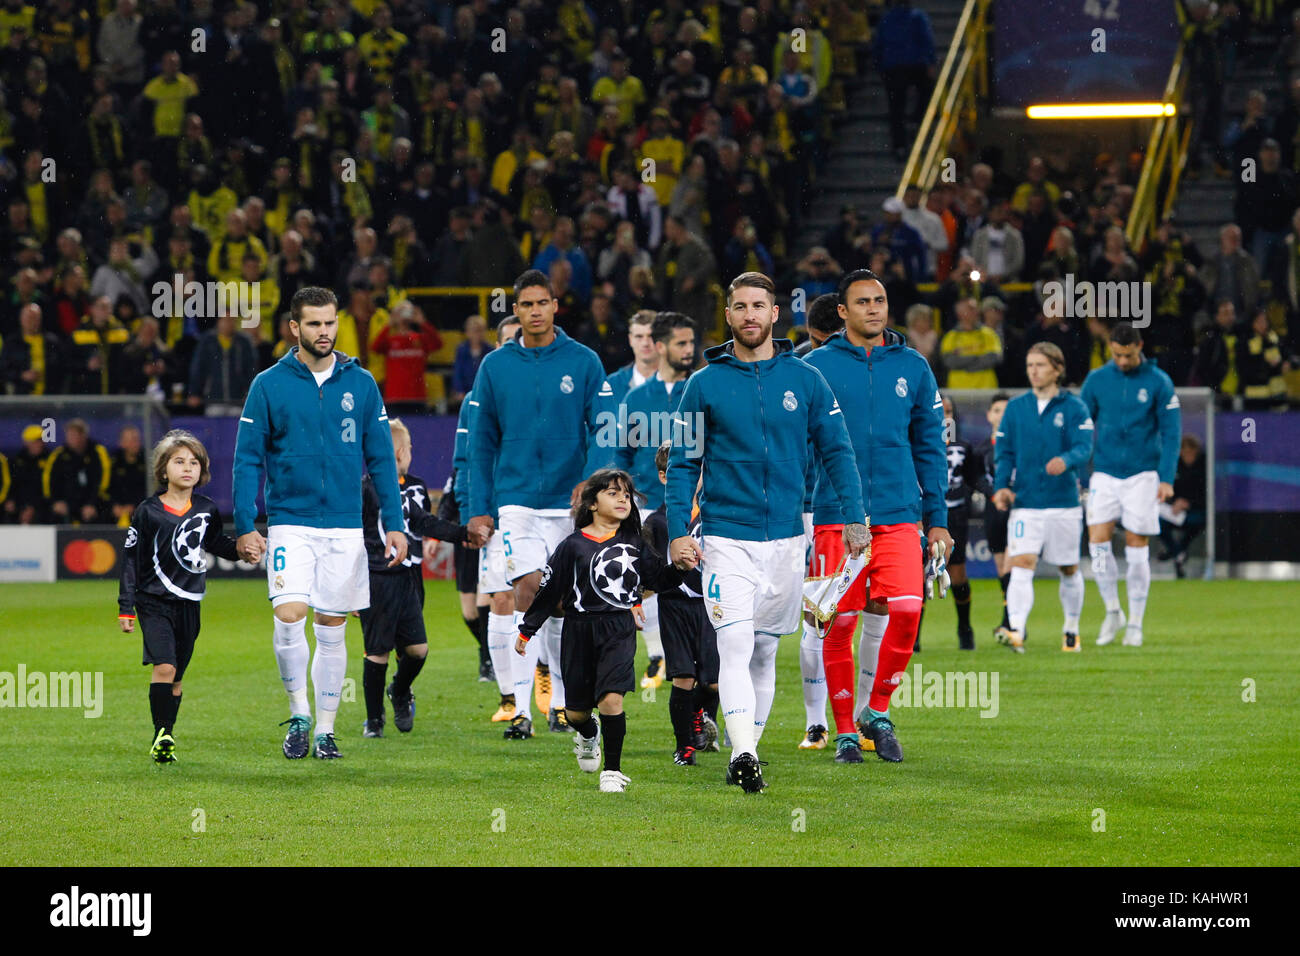 Dortmund, Germany. 26th Sep, 2017. Sergio Ramos Garcia (4) Real Madrid's player. Jose I. Fernandez Iglesias (6) Real Madrid's player, during the match 2, between Borussia Dortmund vs Real Madrid at the Signal Iduna Park stadium in Dortmund, Germany, September 26, 2017 . Credit: Gtres Información más Comuniación on line, S.L./Alamy Live News Stock Photo